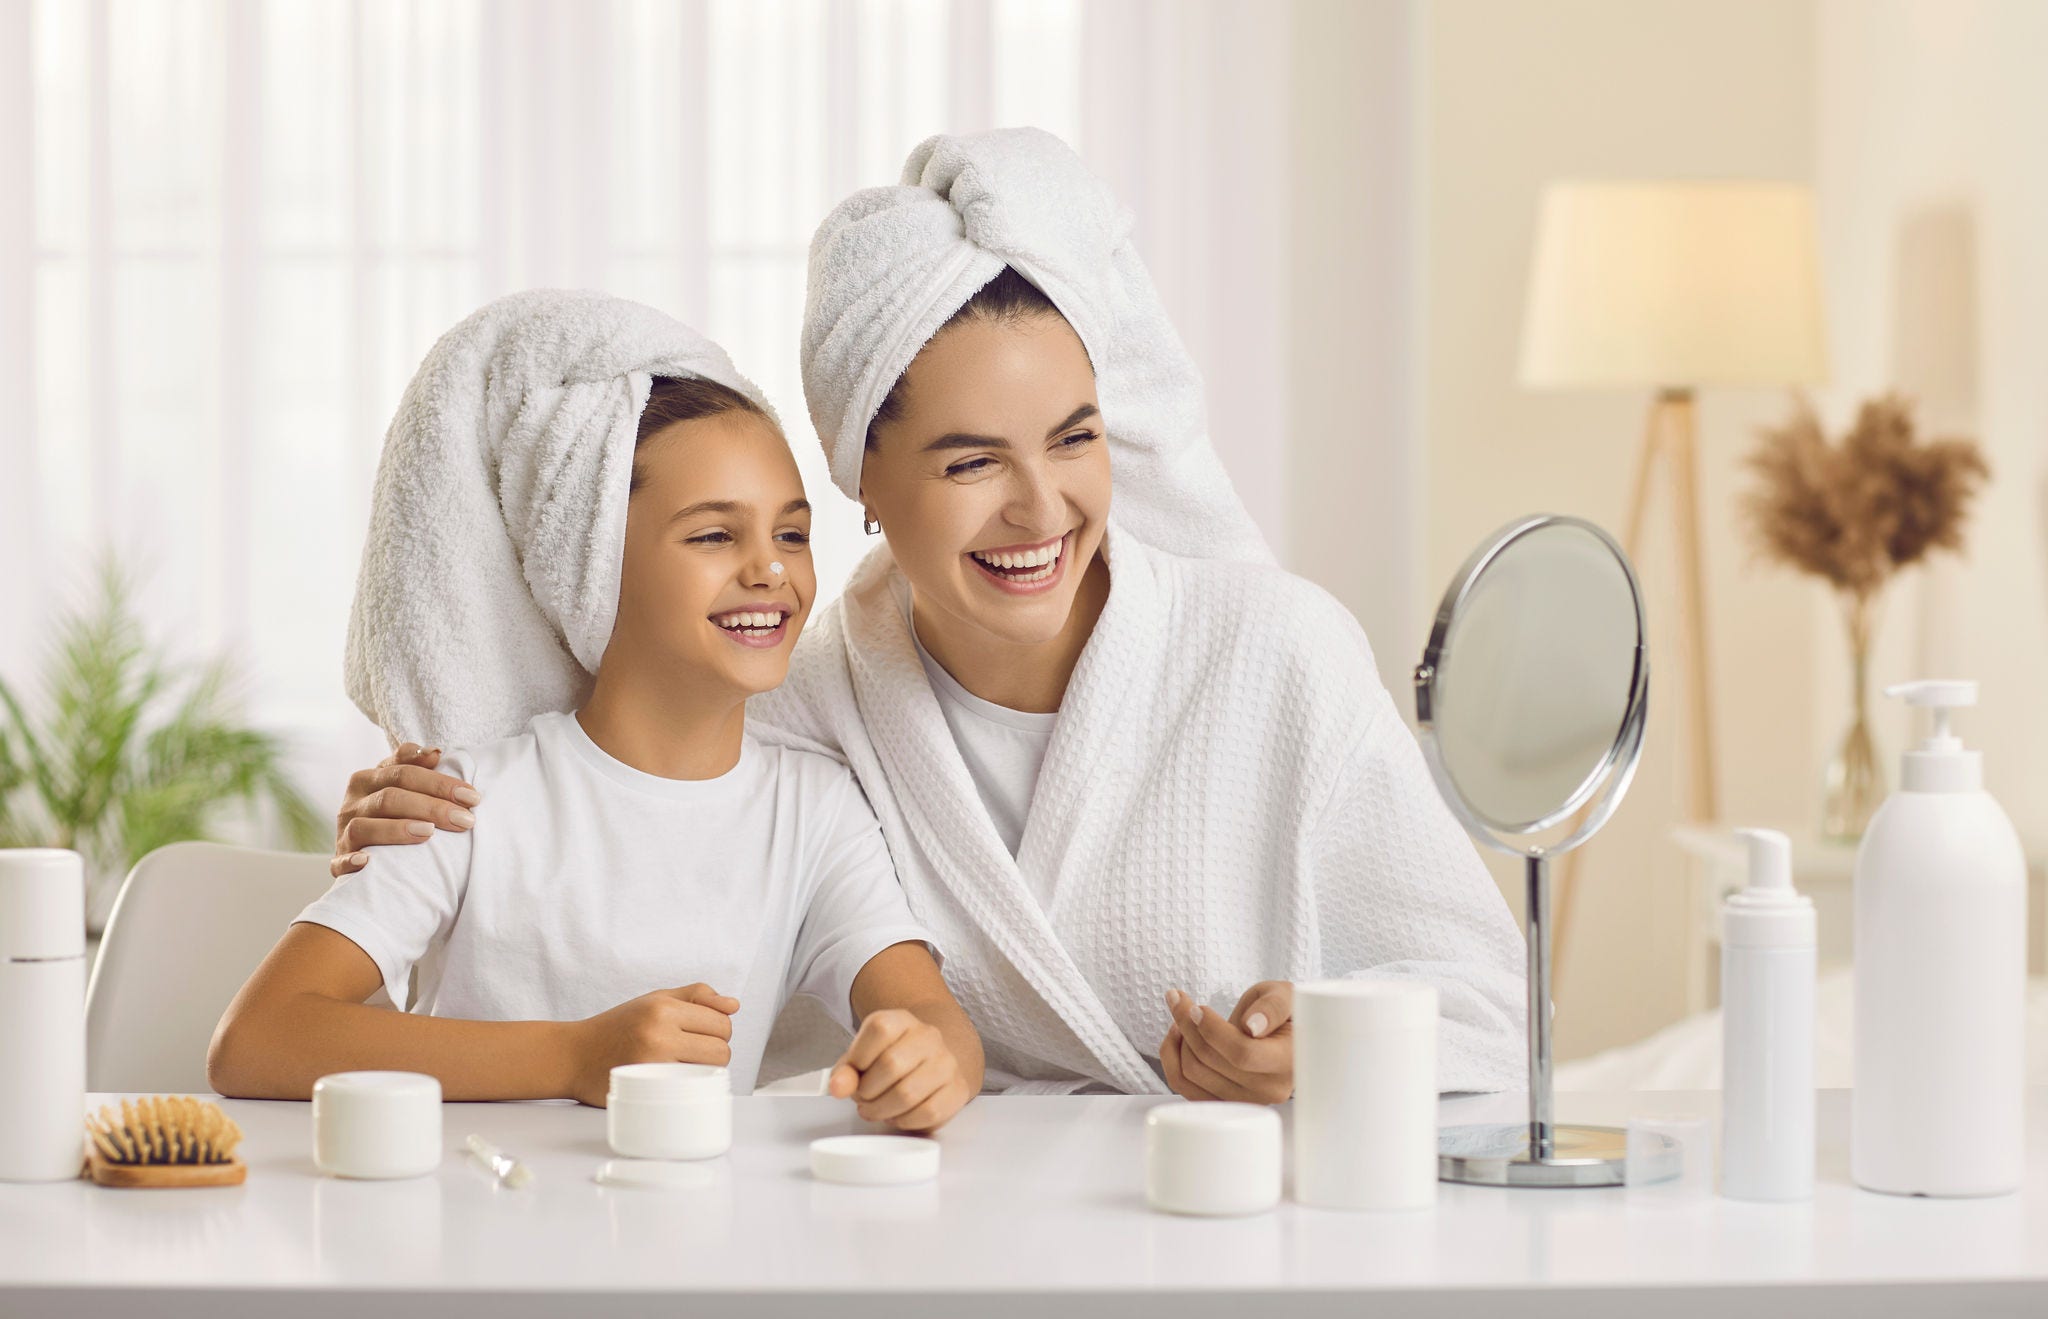 Happy mother and child enjoying morning skin care routine together. Cheerful beautiful mommy and little daughter looking in small mirror on beauty table in bedroom, applying face cream and laughing